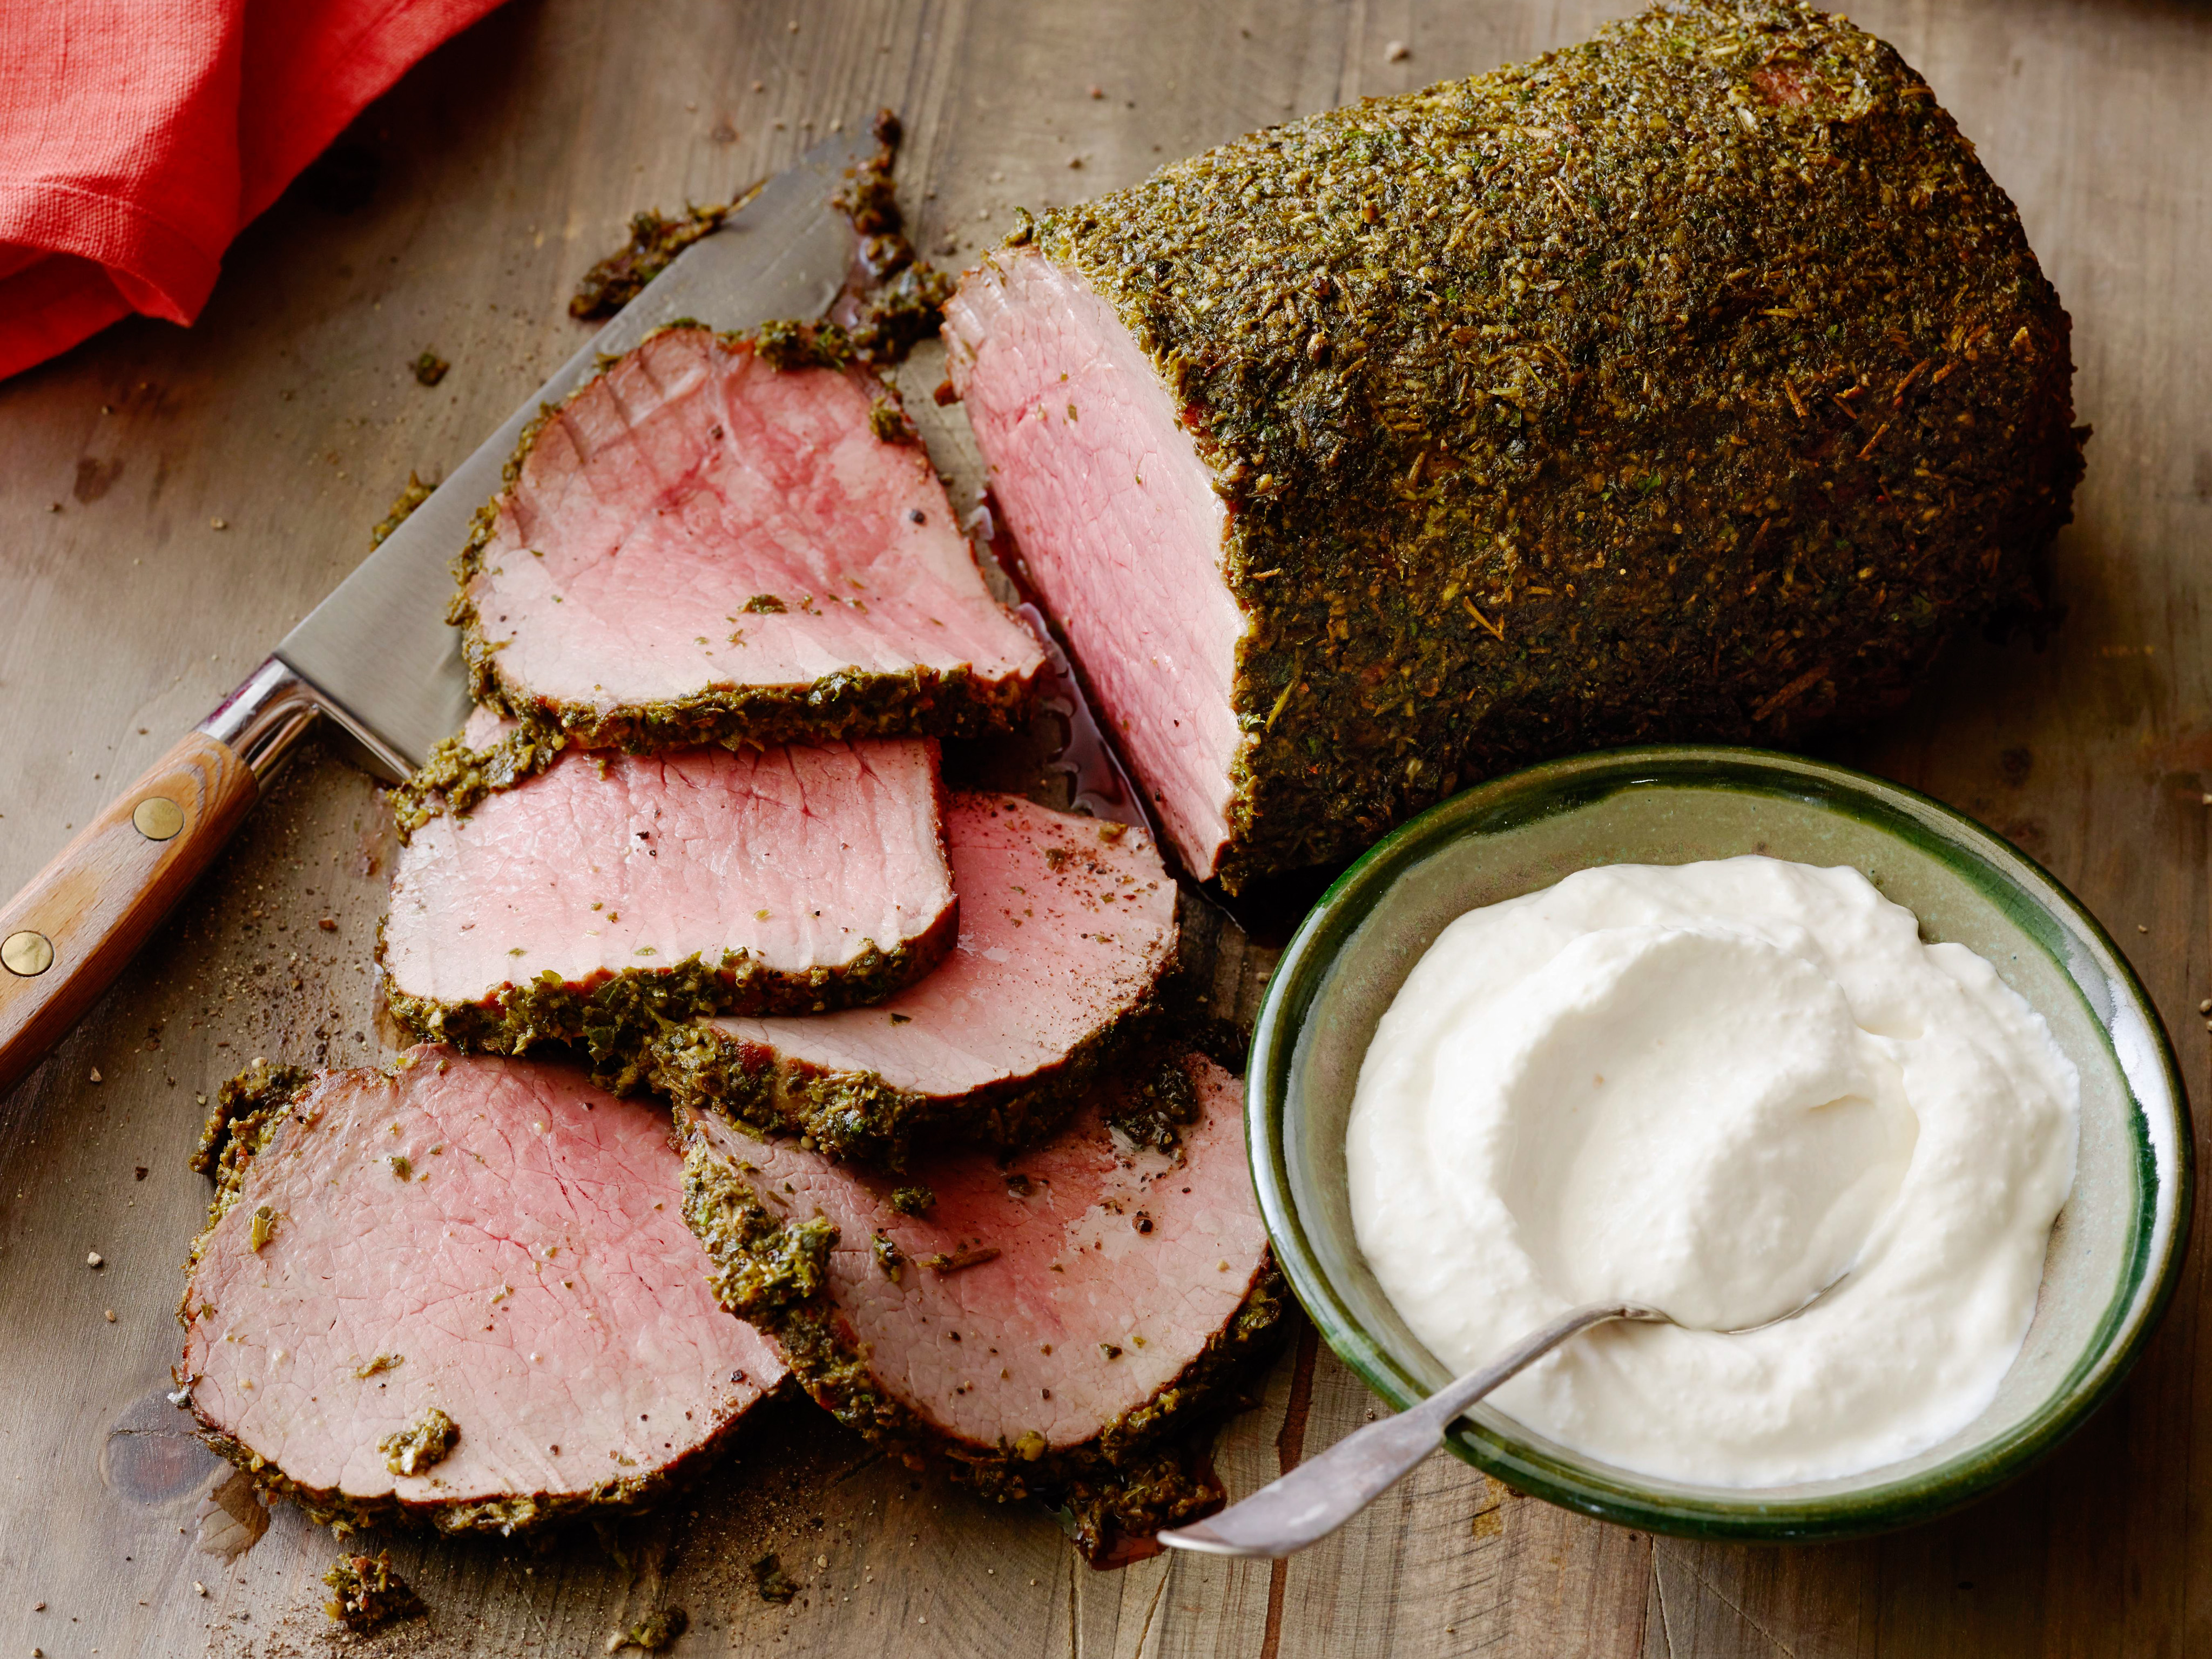 https://www.foodnetwork.com/content/dam/images/food/fullset/2009/5/7/1/RE0403-1_Herb-Crusted-Roast-Beef_s4x3.jpg